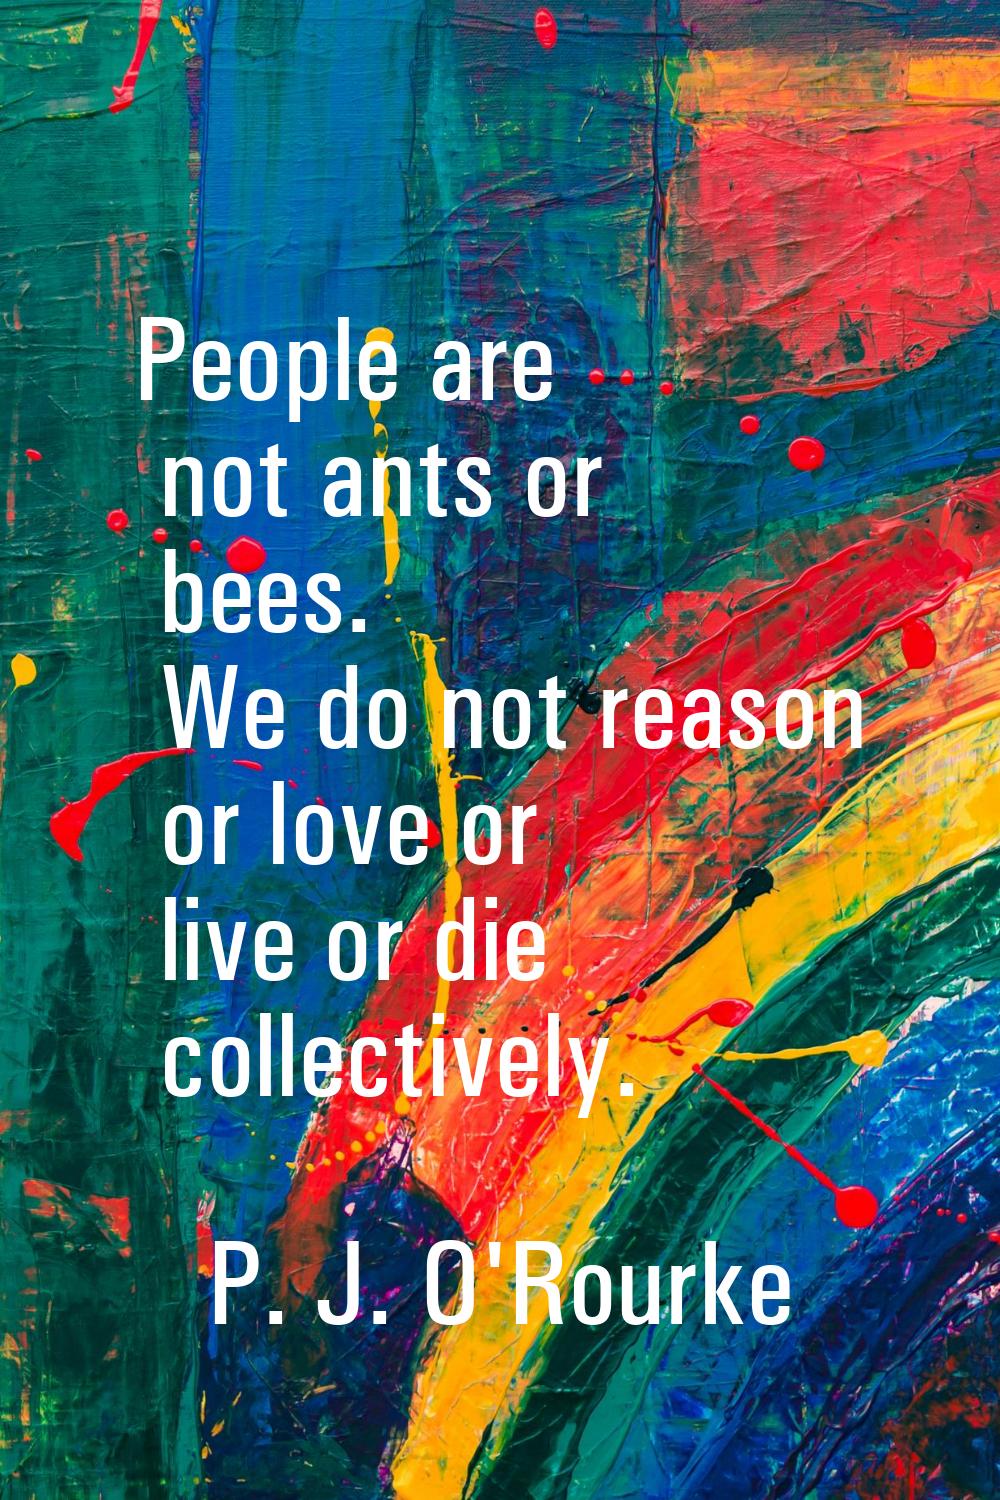 People are not ants or bees. We do not reason or love or live or die collectively.